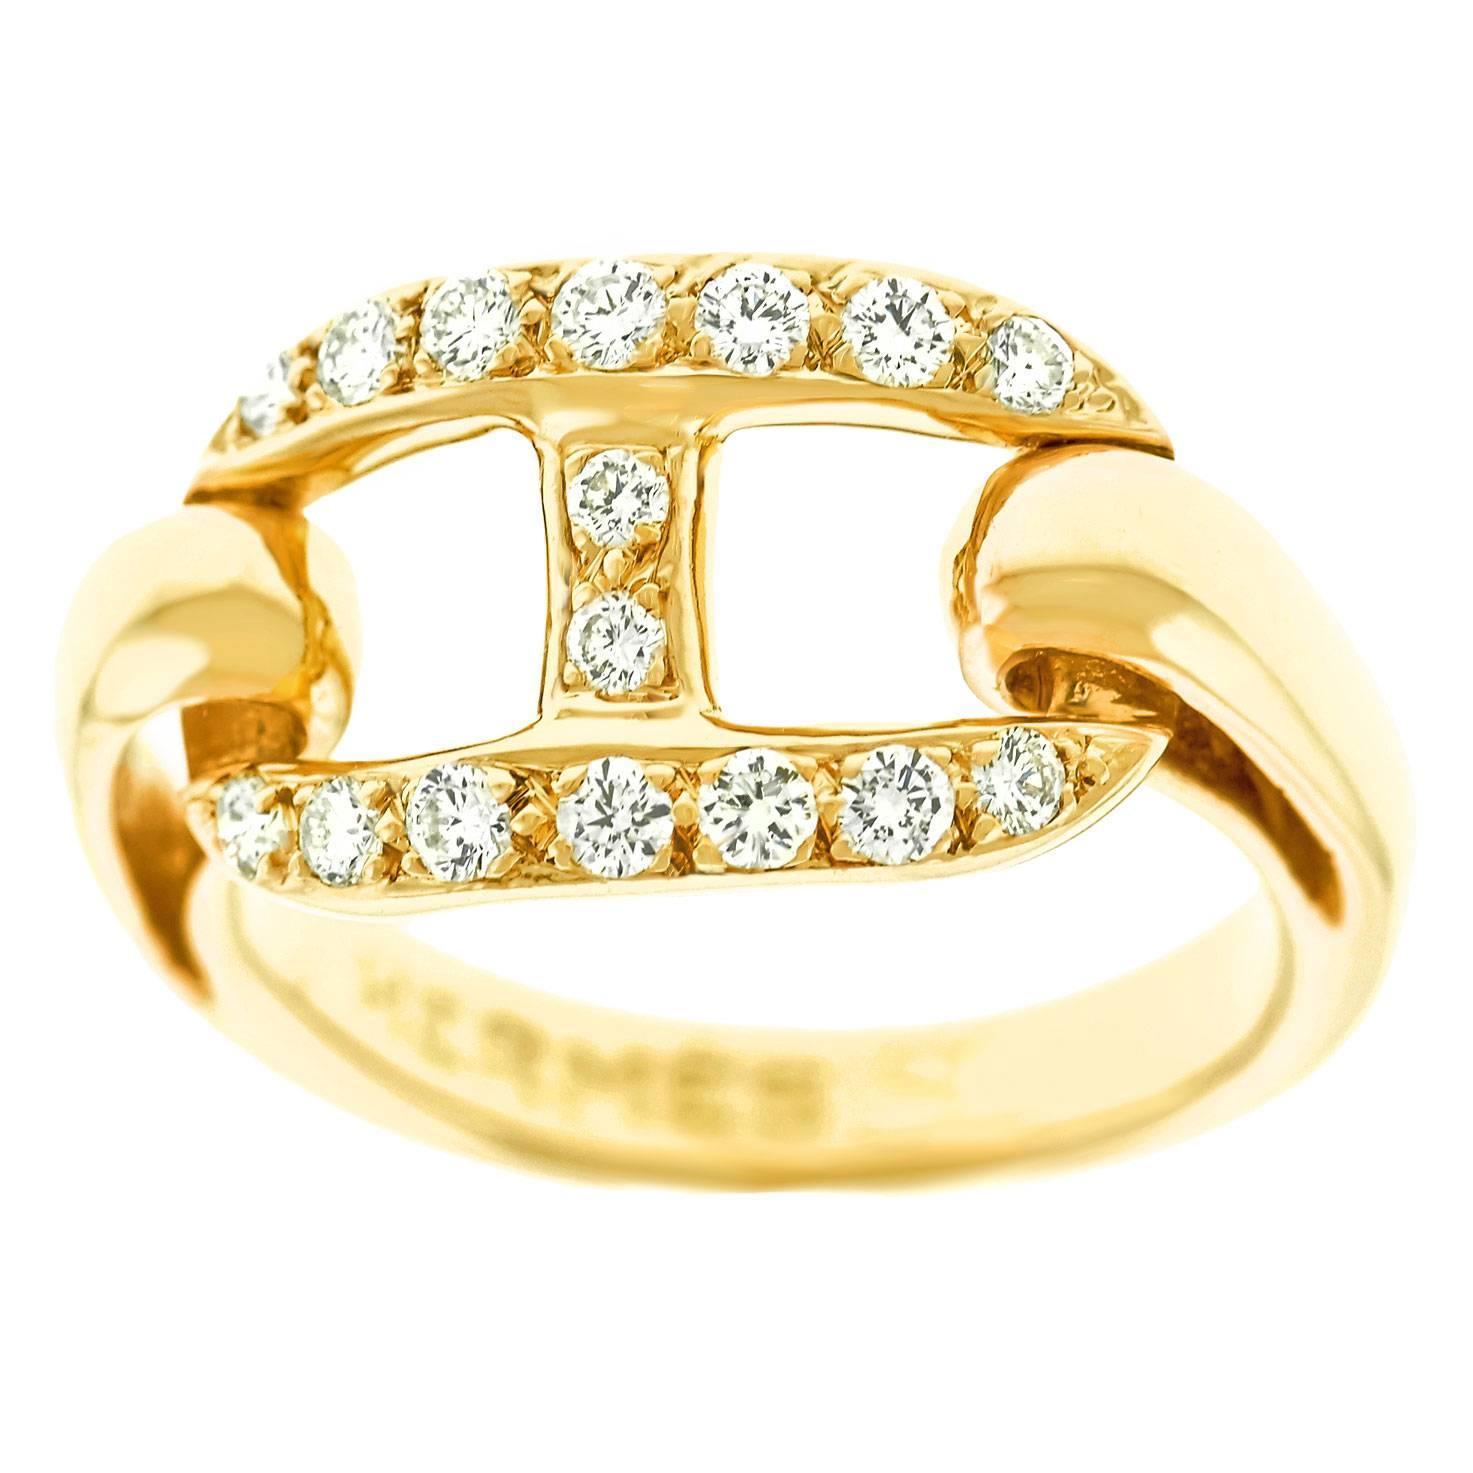 Hermes Diamond Chaine D’Ancre Motif Gold Ring at 1stdibs